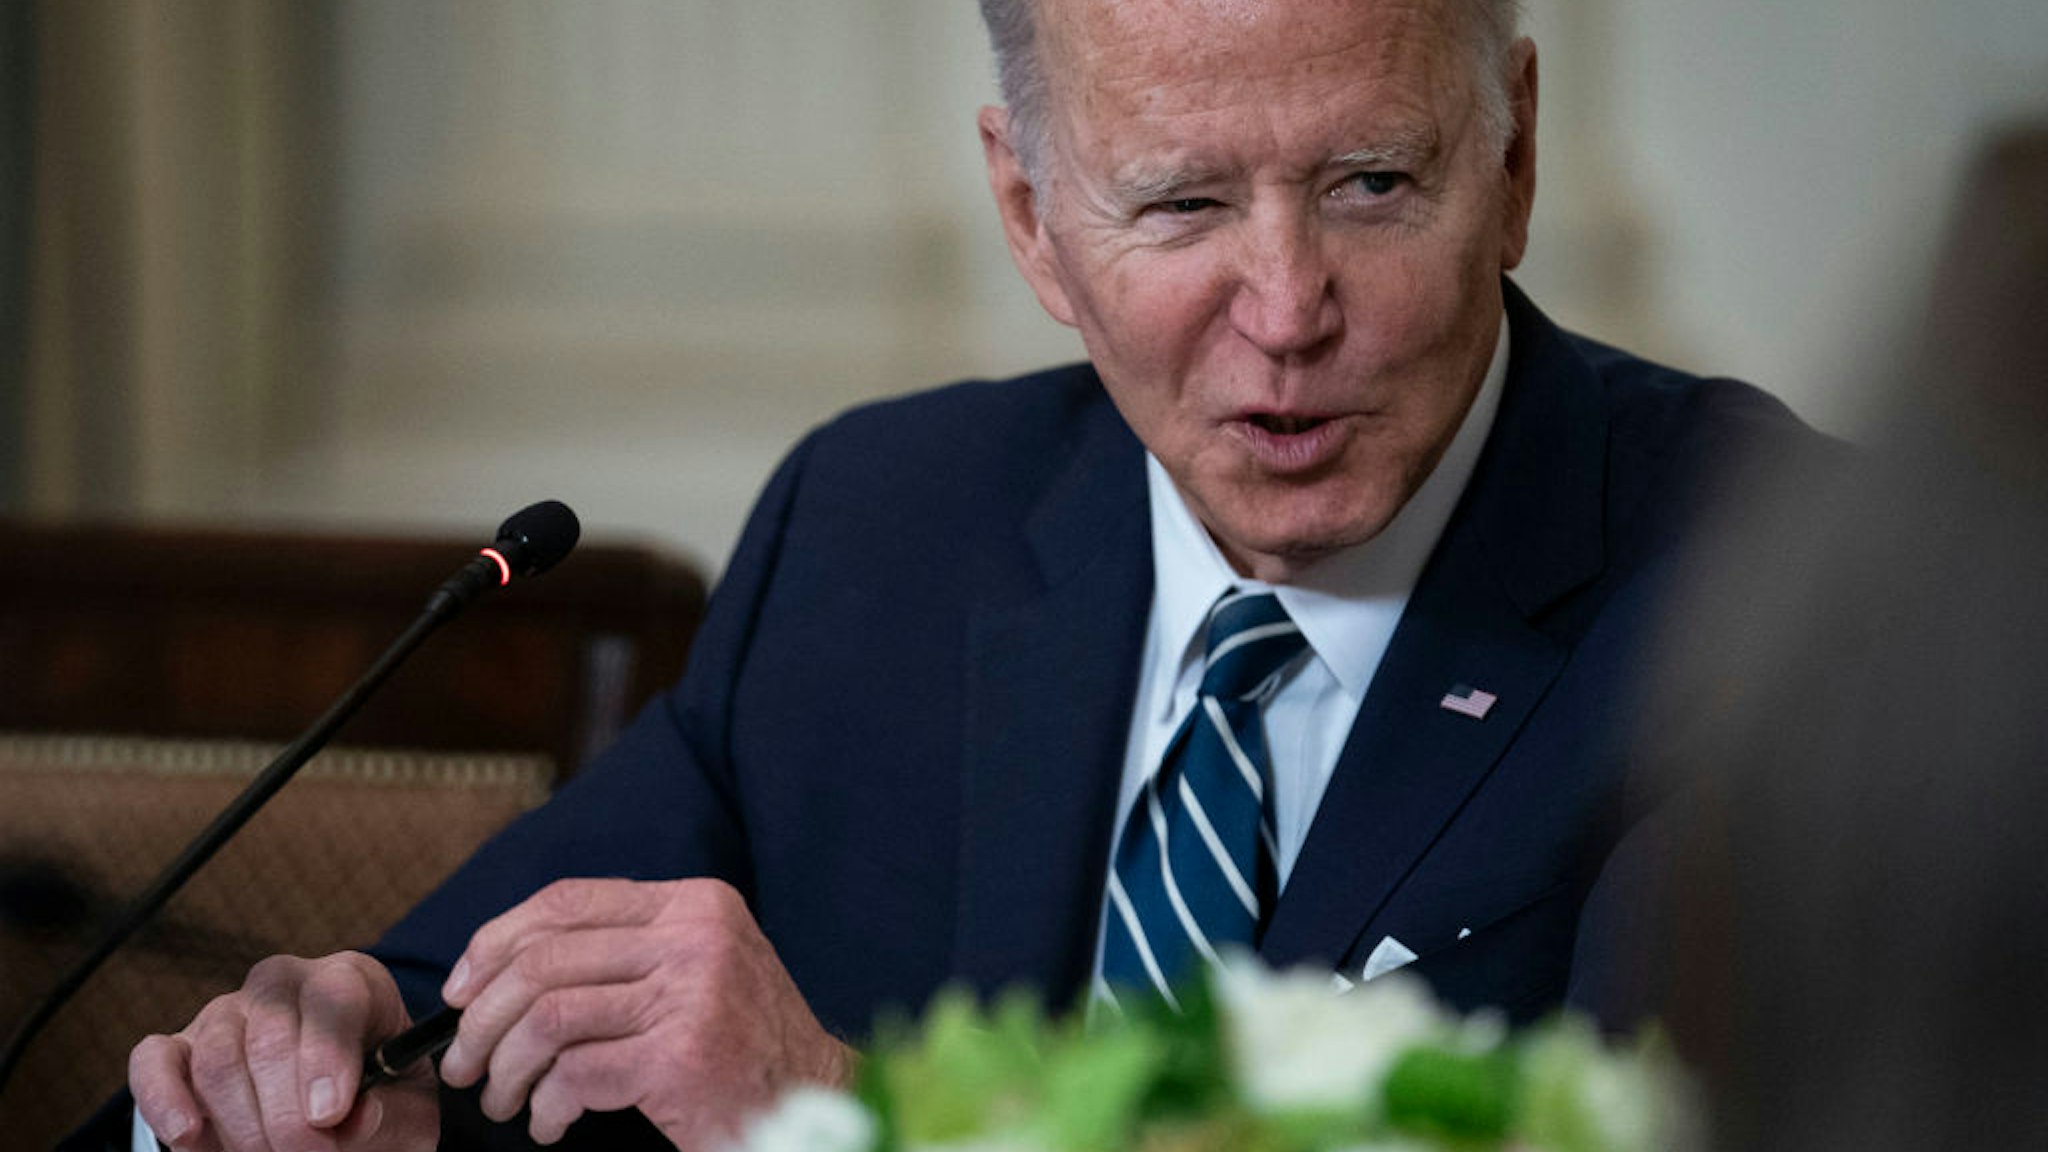 WASHINGTON, DC - APRIL 29: U.S. President Joe Biden speaks during a meeting with Inspectors General in the State Dining Room at the White House on April 29, 2022 in Washington, DC. (Photo by Sarah Silbiger/Getty Images)